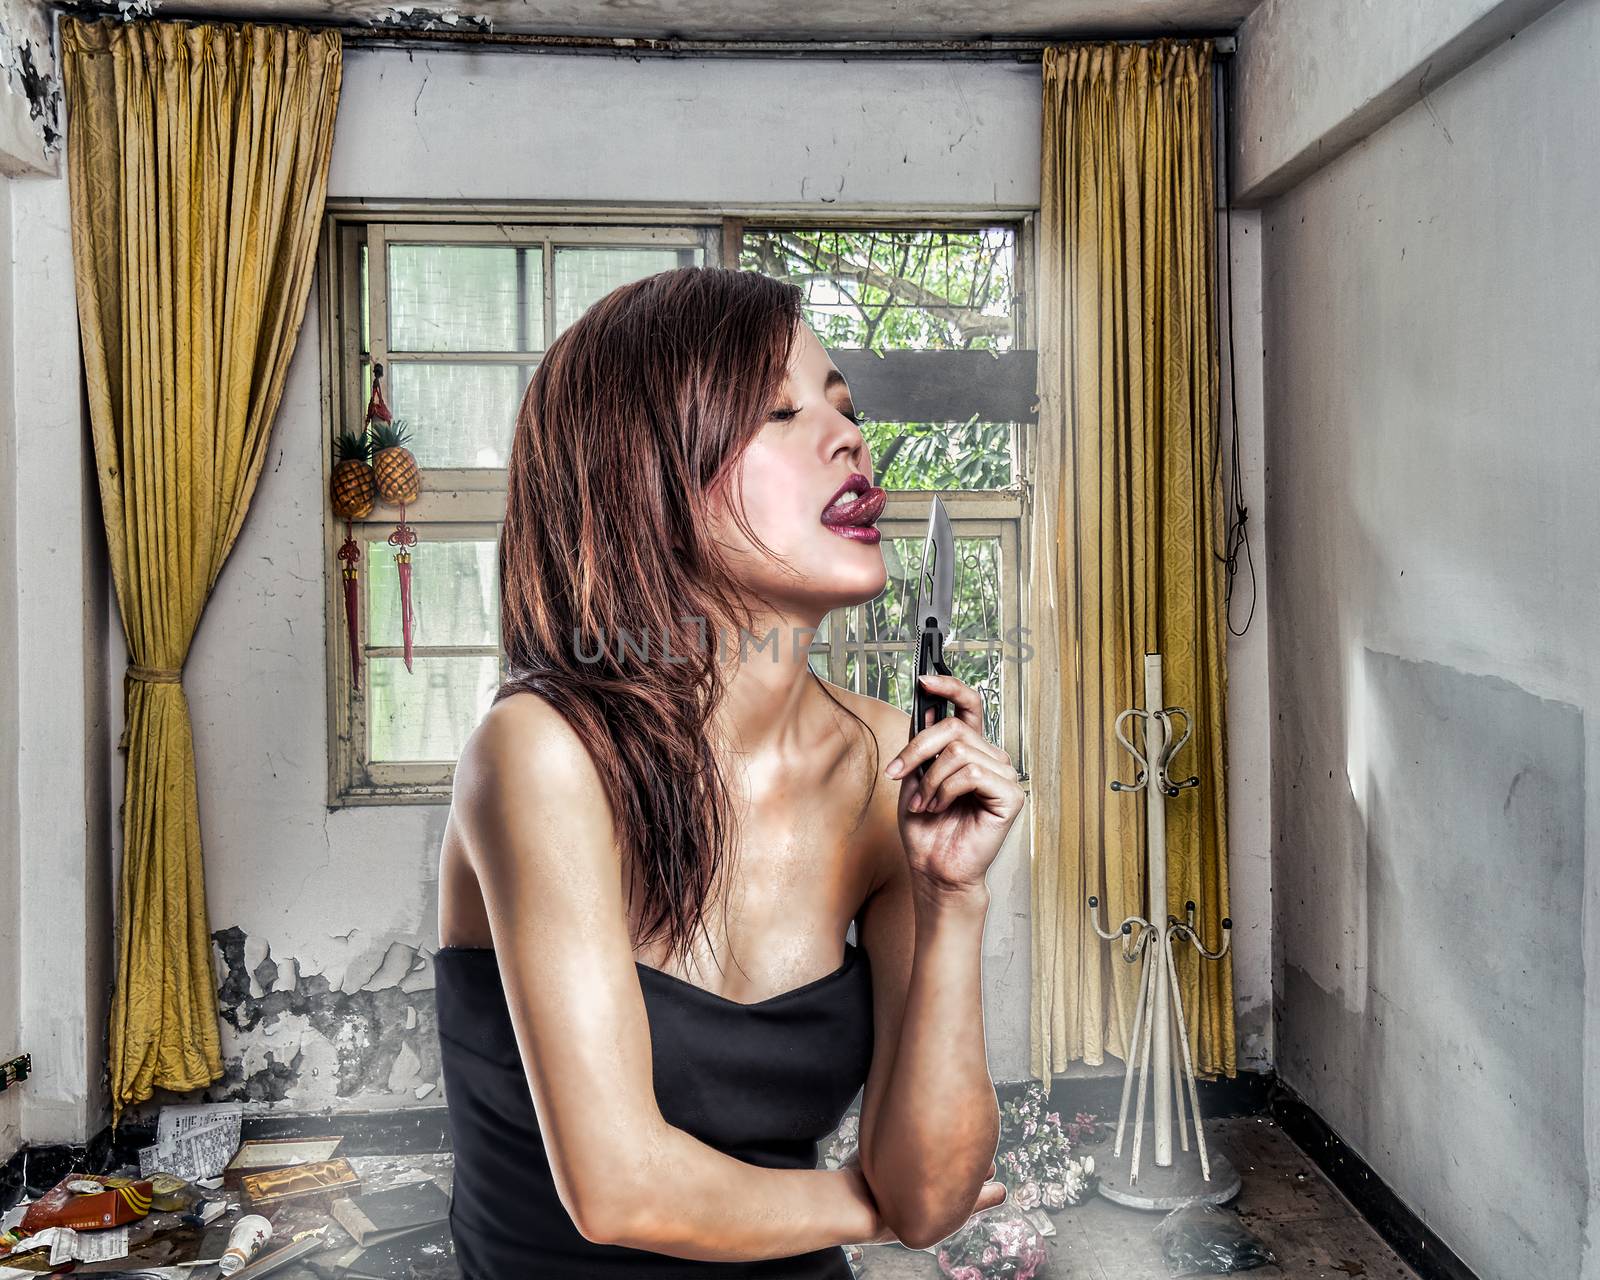 Chinese woman in abandoned aprtment about to lick a knife by imagesbykenny